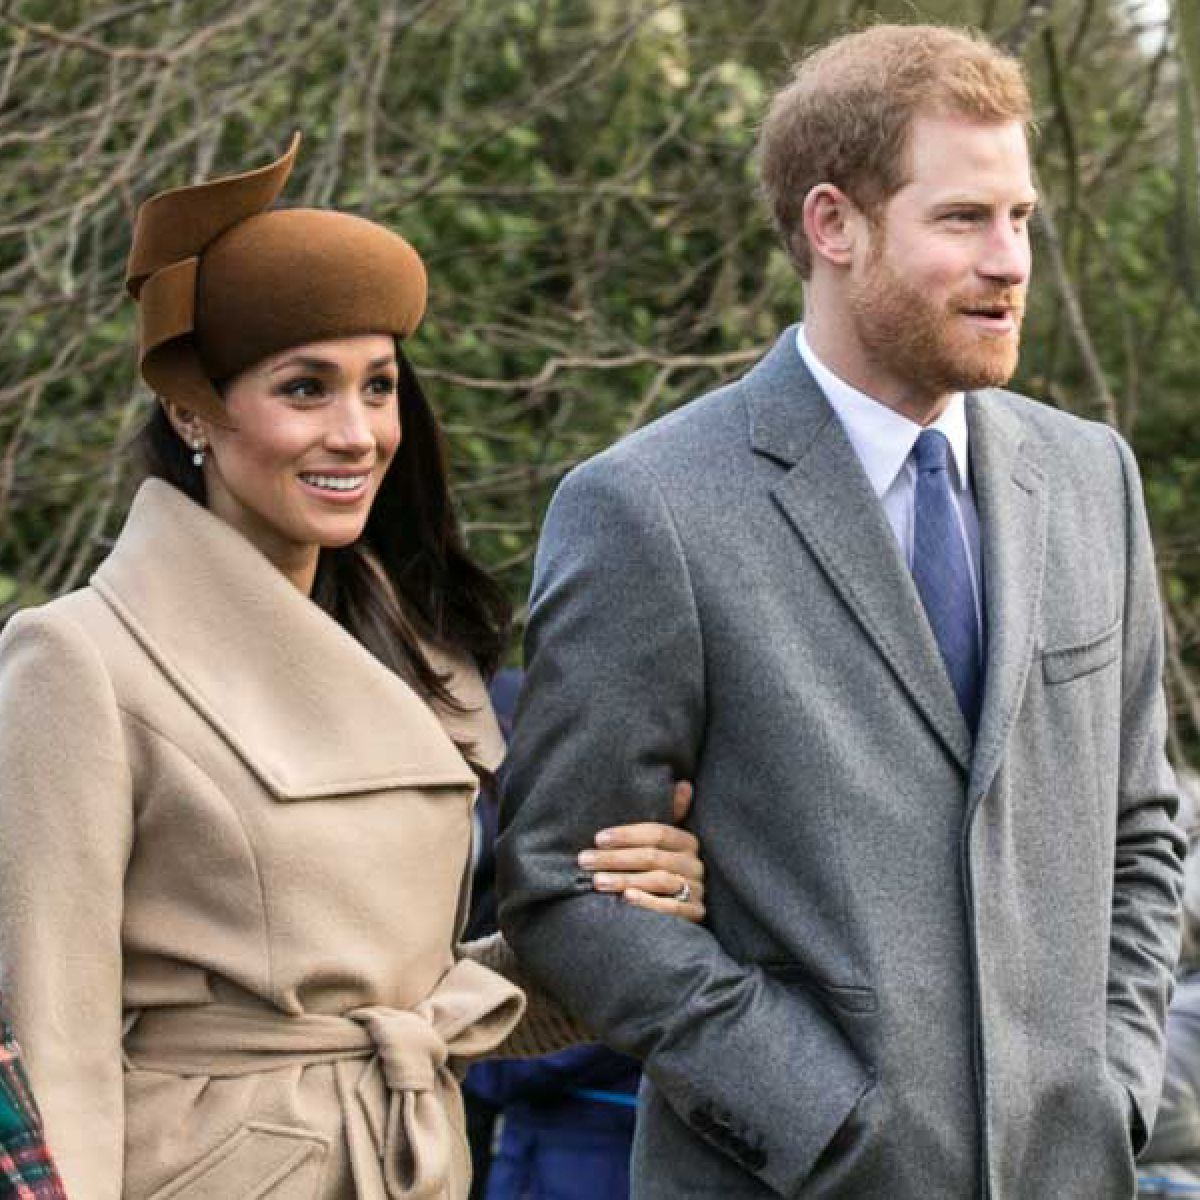 Meghan and Harry are finally getting their happily ever after